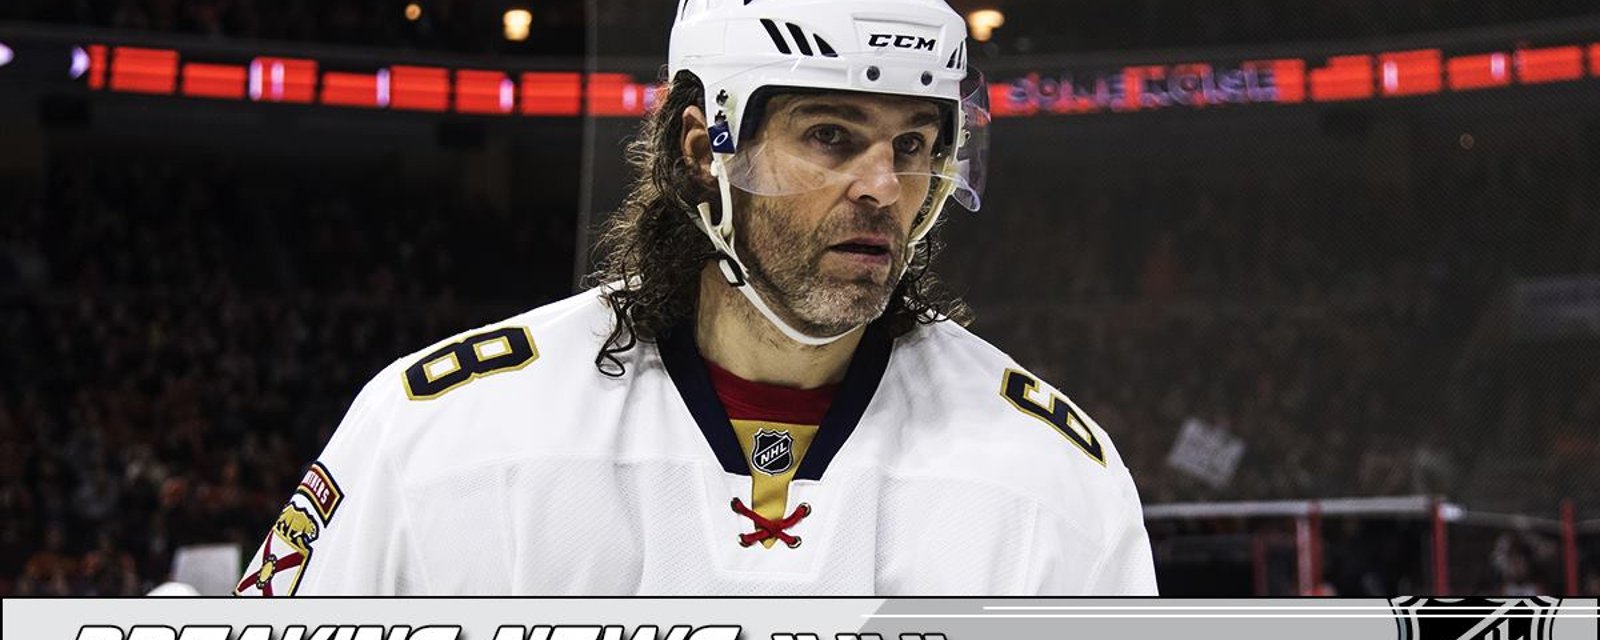 Rumor: A potential hint about Jagr signing with NHL team.